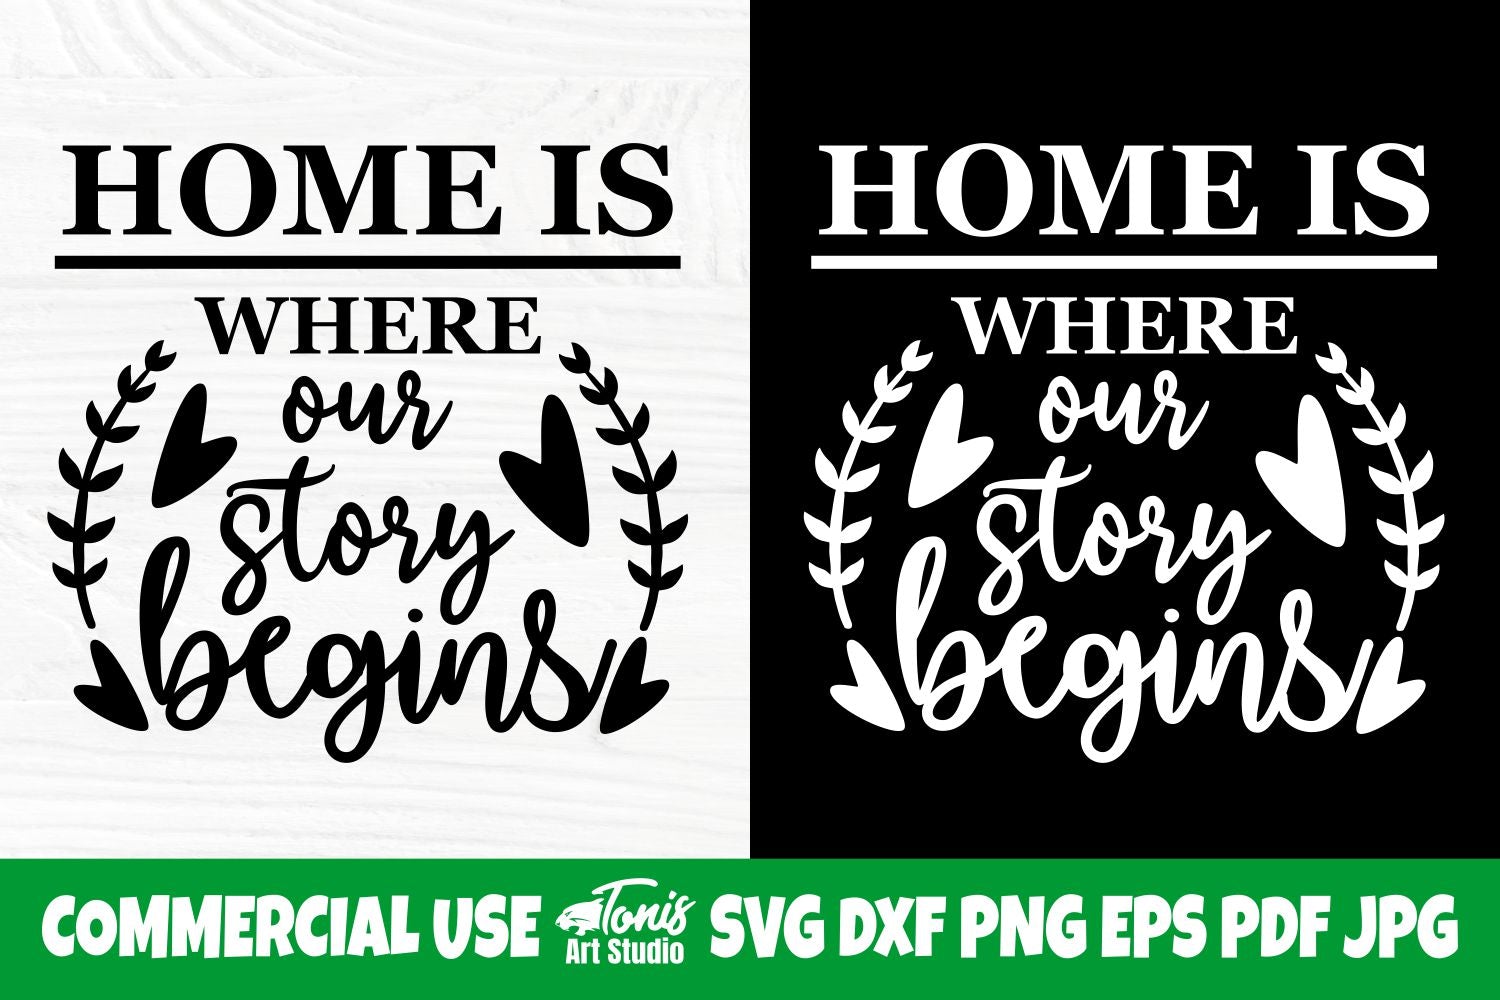 The Home Is Where Our Story Begins